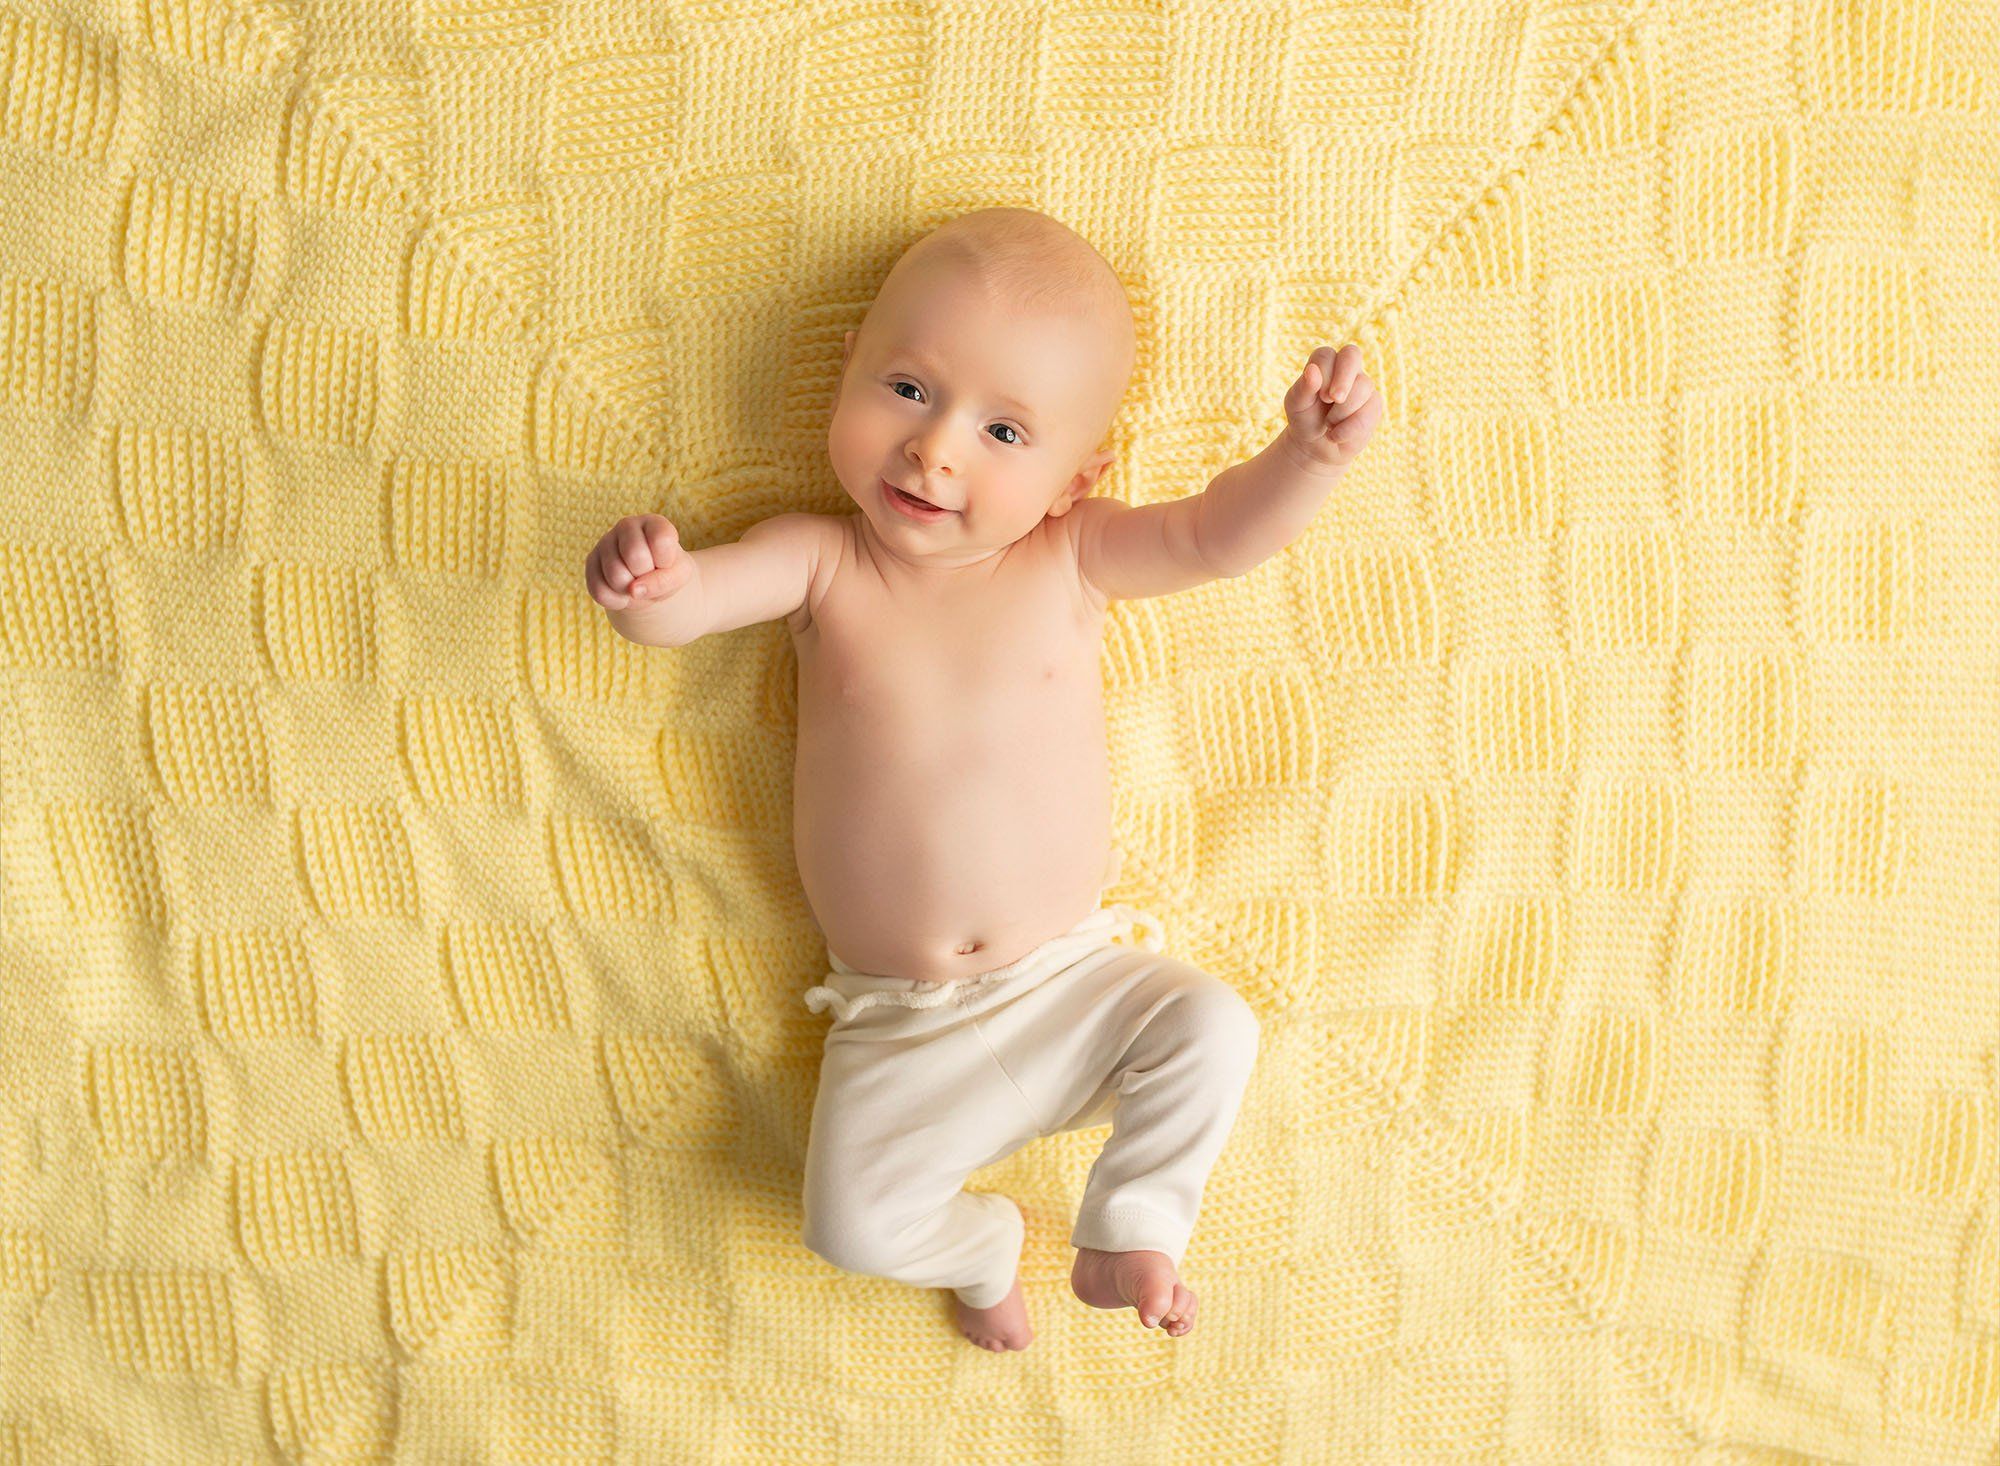 3 month old baby boy stretching on yellow blanket and looking at the camera